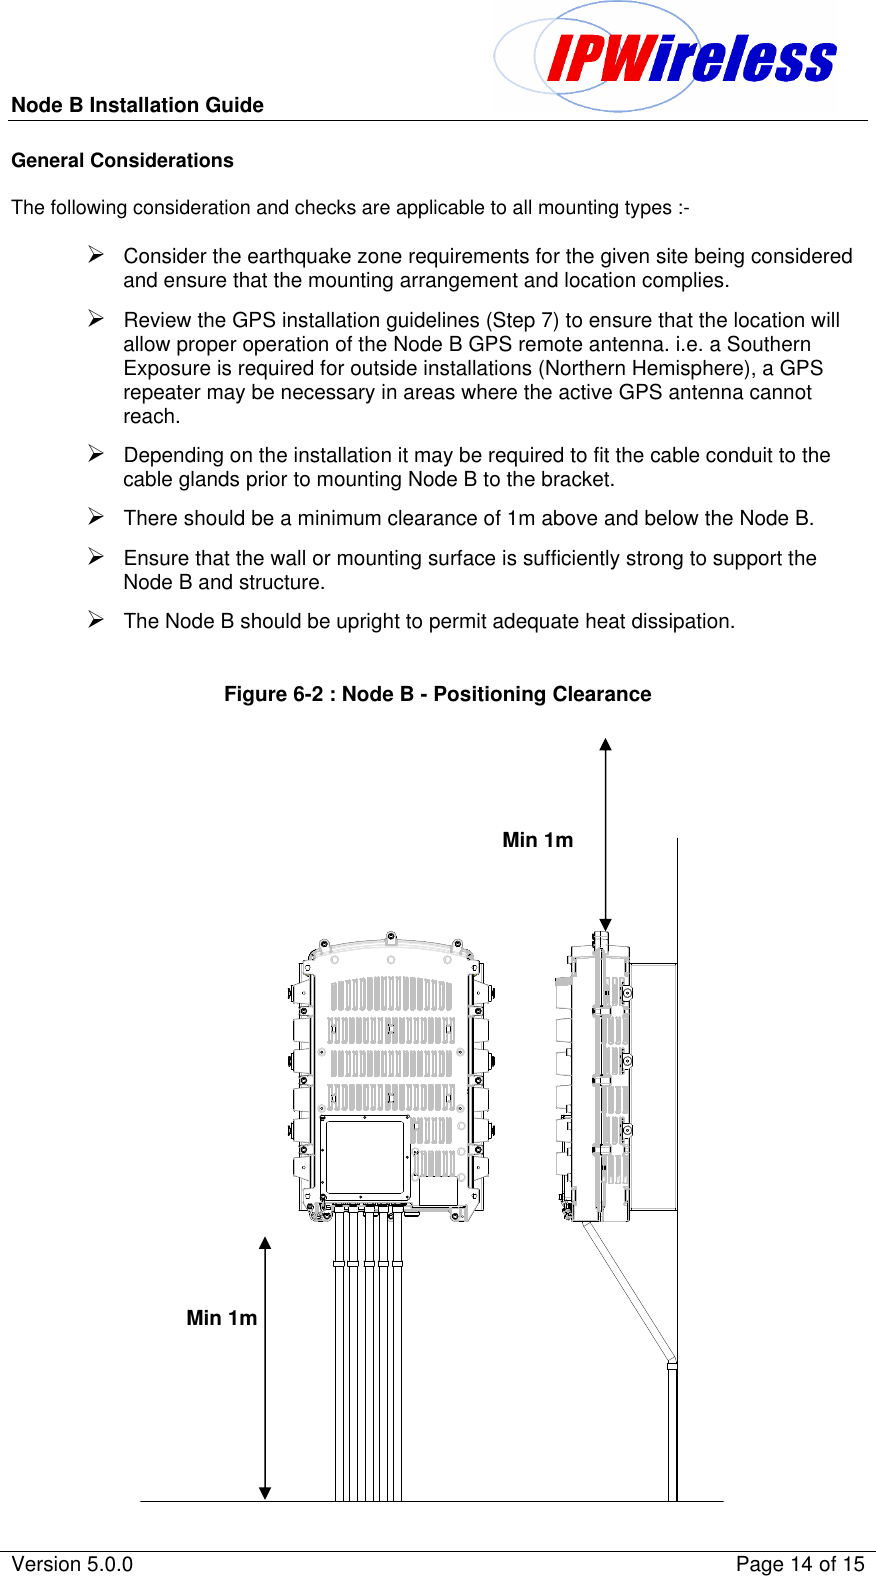 Node B Installation Guide                                               Version 5.0.0    Page 14 of 15  General Considerations  The following consideration and checks are applicable to all mounting types :-  Ø Consider the earthquake zone requirements for the given site being considered and ensure that the mounting arrangement and location complies. Ø Review the GPS installation guidelines (Step 7) to ensure that the location will allow proper operation of the Node B GPS remote antenna. i.e. a Southern Exposure is required for outside installations (Northern Hemisphere), a GPS repeater may be necessary in areas where the active GPS antenna cannot reach. Ø Depending on the installation it may be required to fit the cable conduit to the cable glands prior to mounting Node B to the bracket. Ø There should be a minimum clearance of 1m above and below the Node B. Ø Ensure that the wall or mounting surface is sufficiently strong to support the Node B and structure. Ø The Node B should be upright to permit adequate heat dissipation.  Figure 6-2 : Node B - Positioning Clearance      Min 1m  Min 1m  